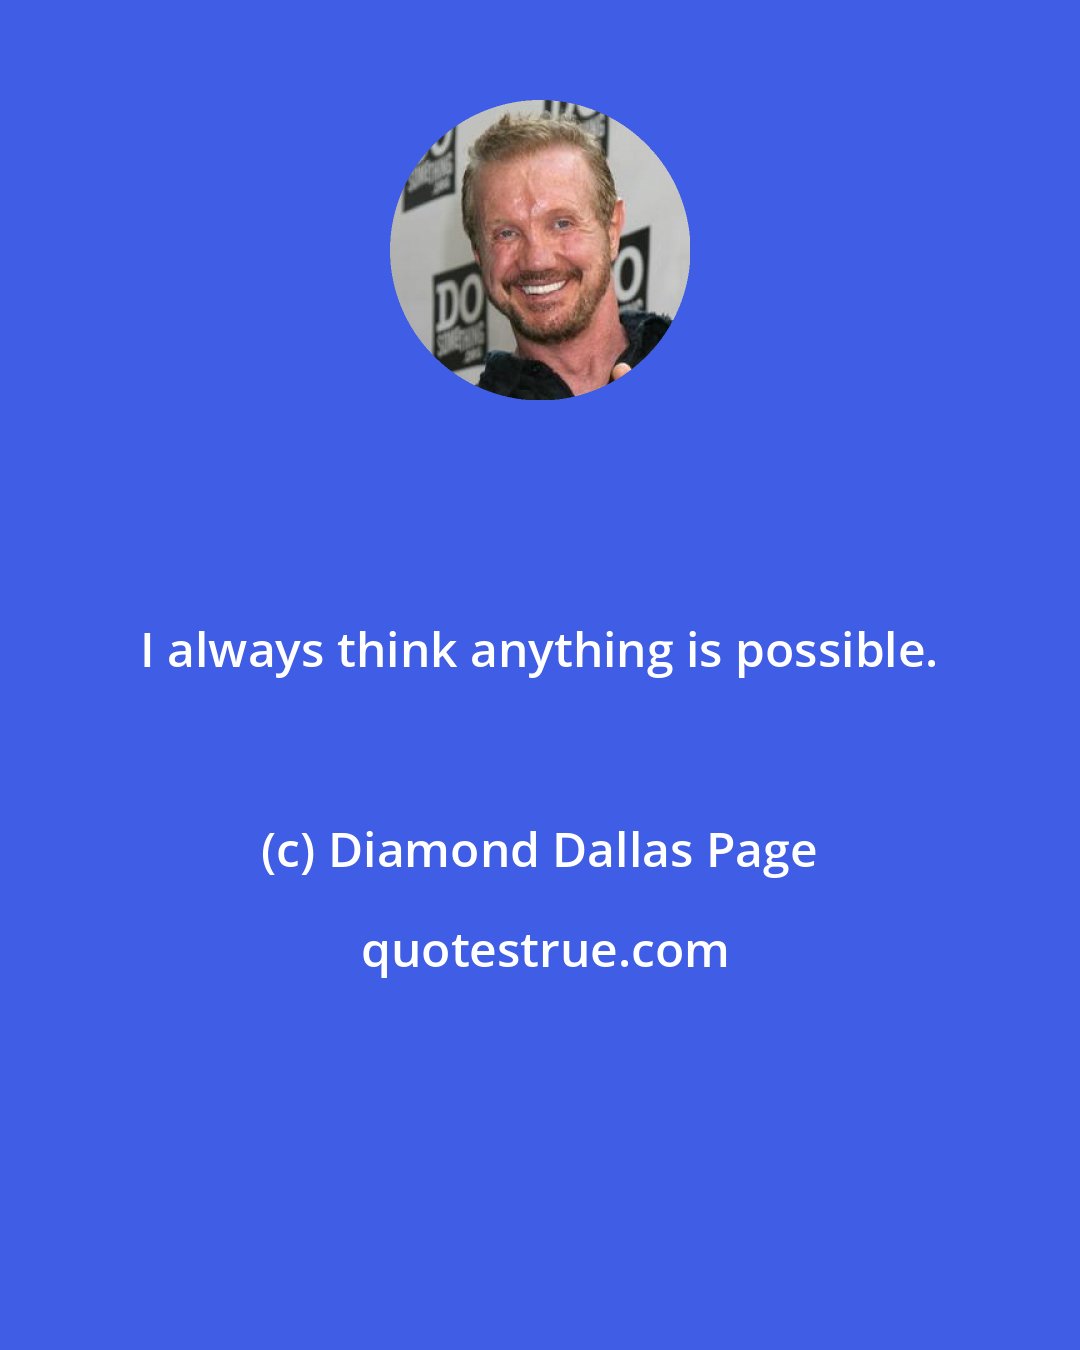 Diamond Dallas Page: I always think anything is possible.